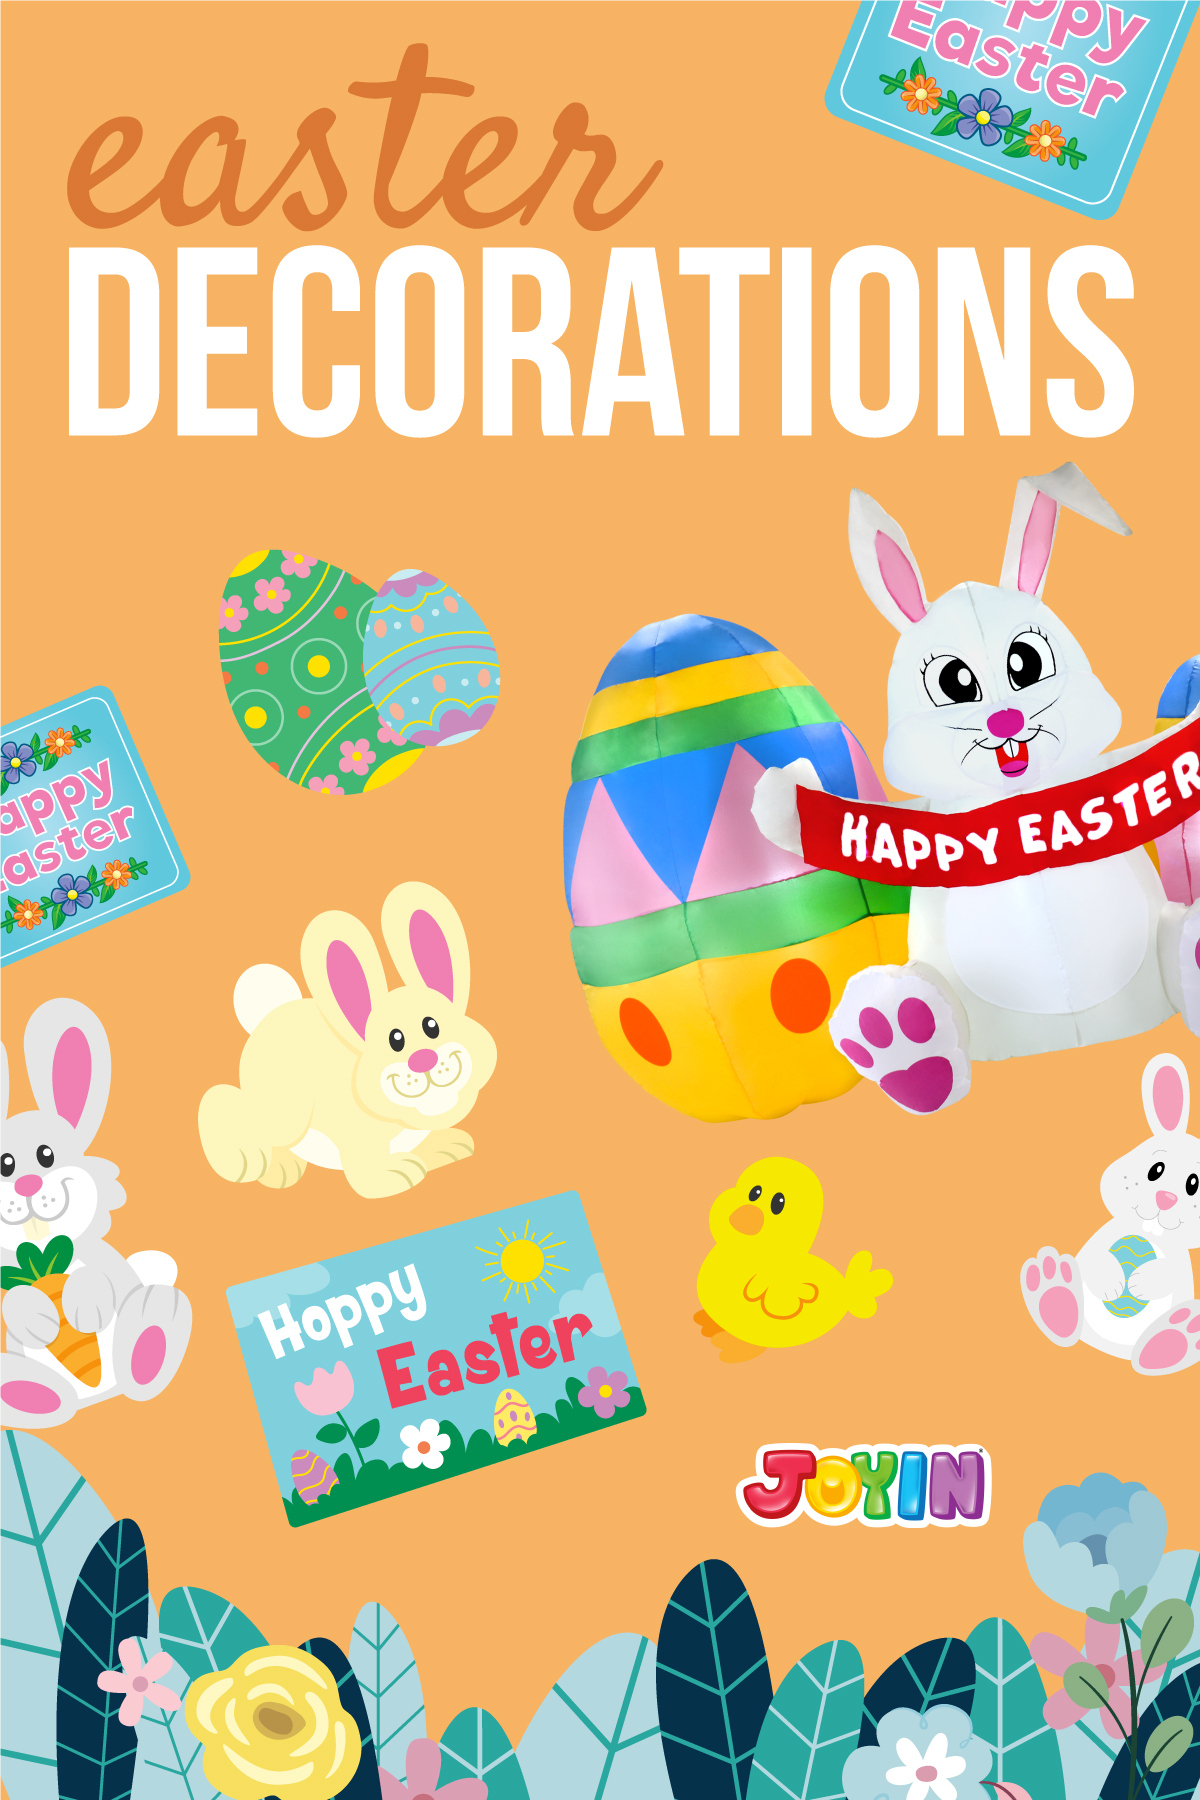 You are currently viewing Top 5 Easter Decor Ideas For Your Home